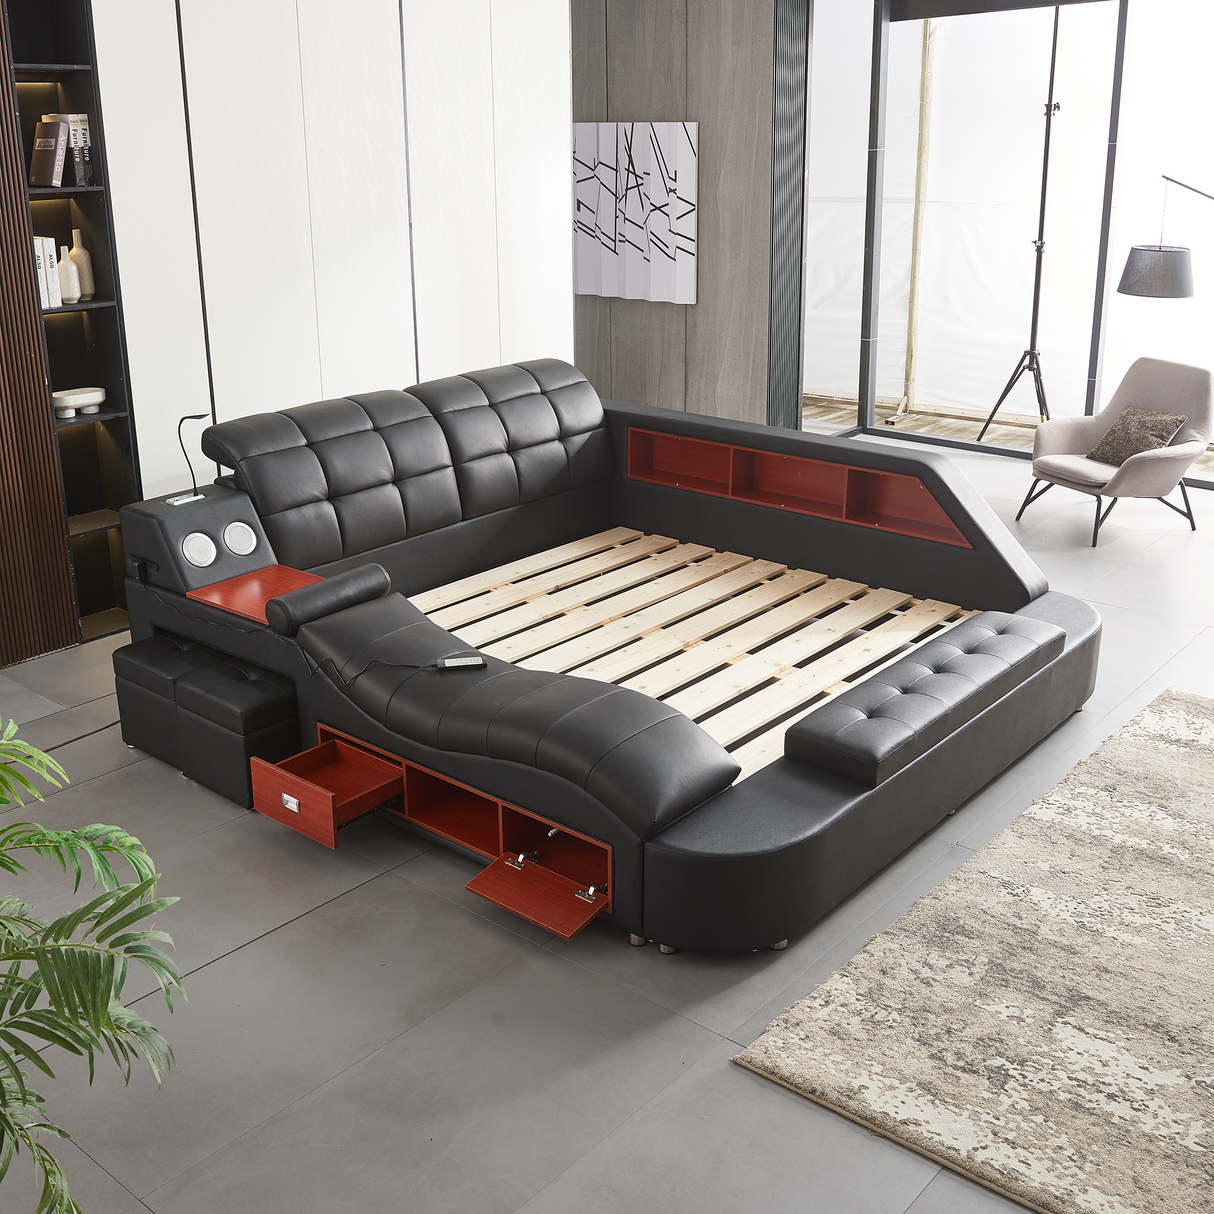 Multifunctional Upholstered Storage Bed Frame, Massage Chaise Lounge on Right ,Queen Size, Black - Home Elegance USA